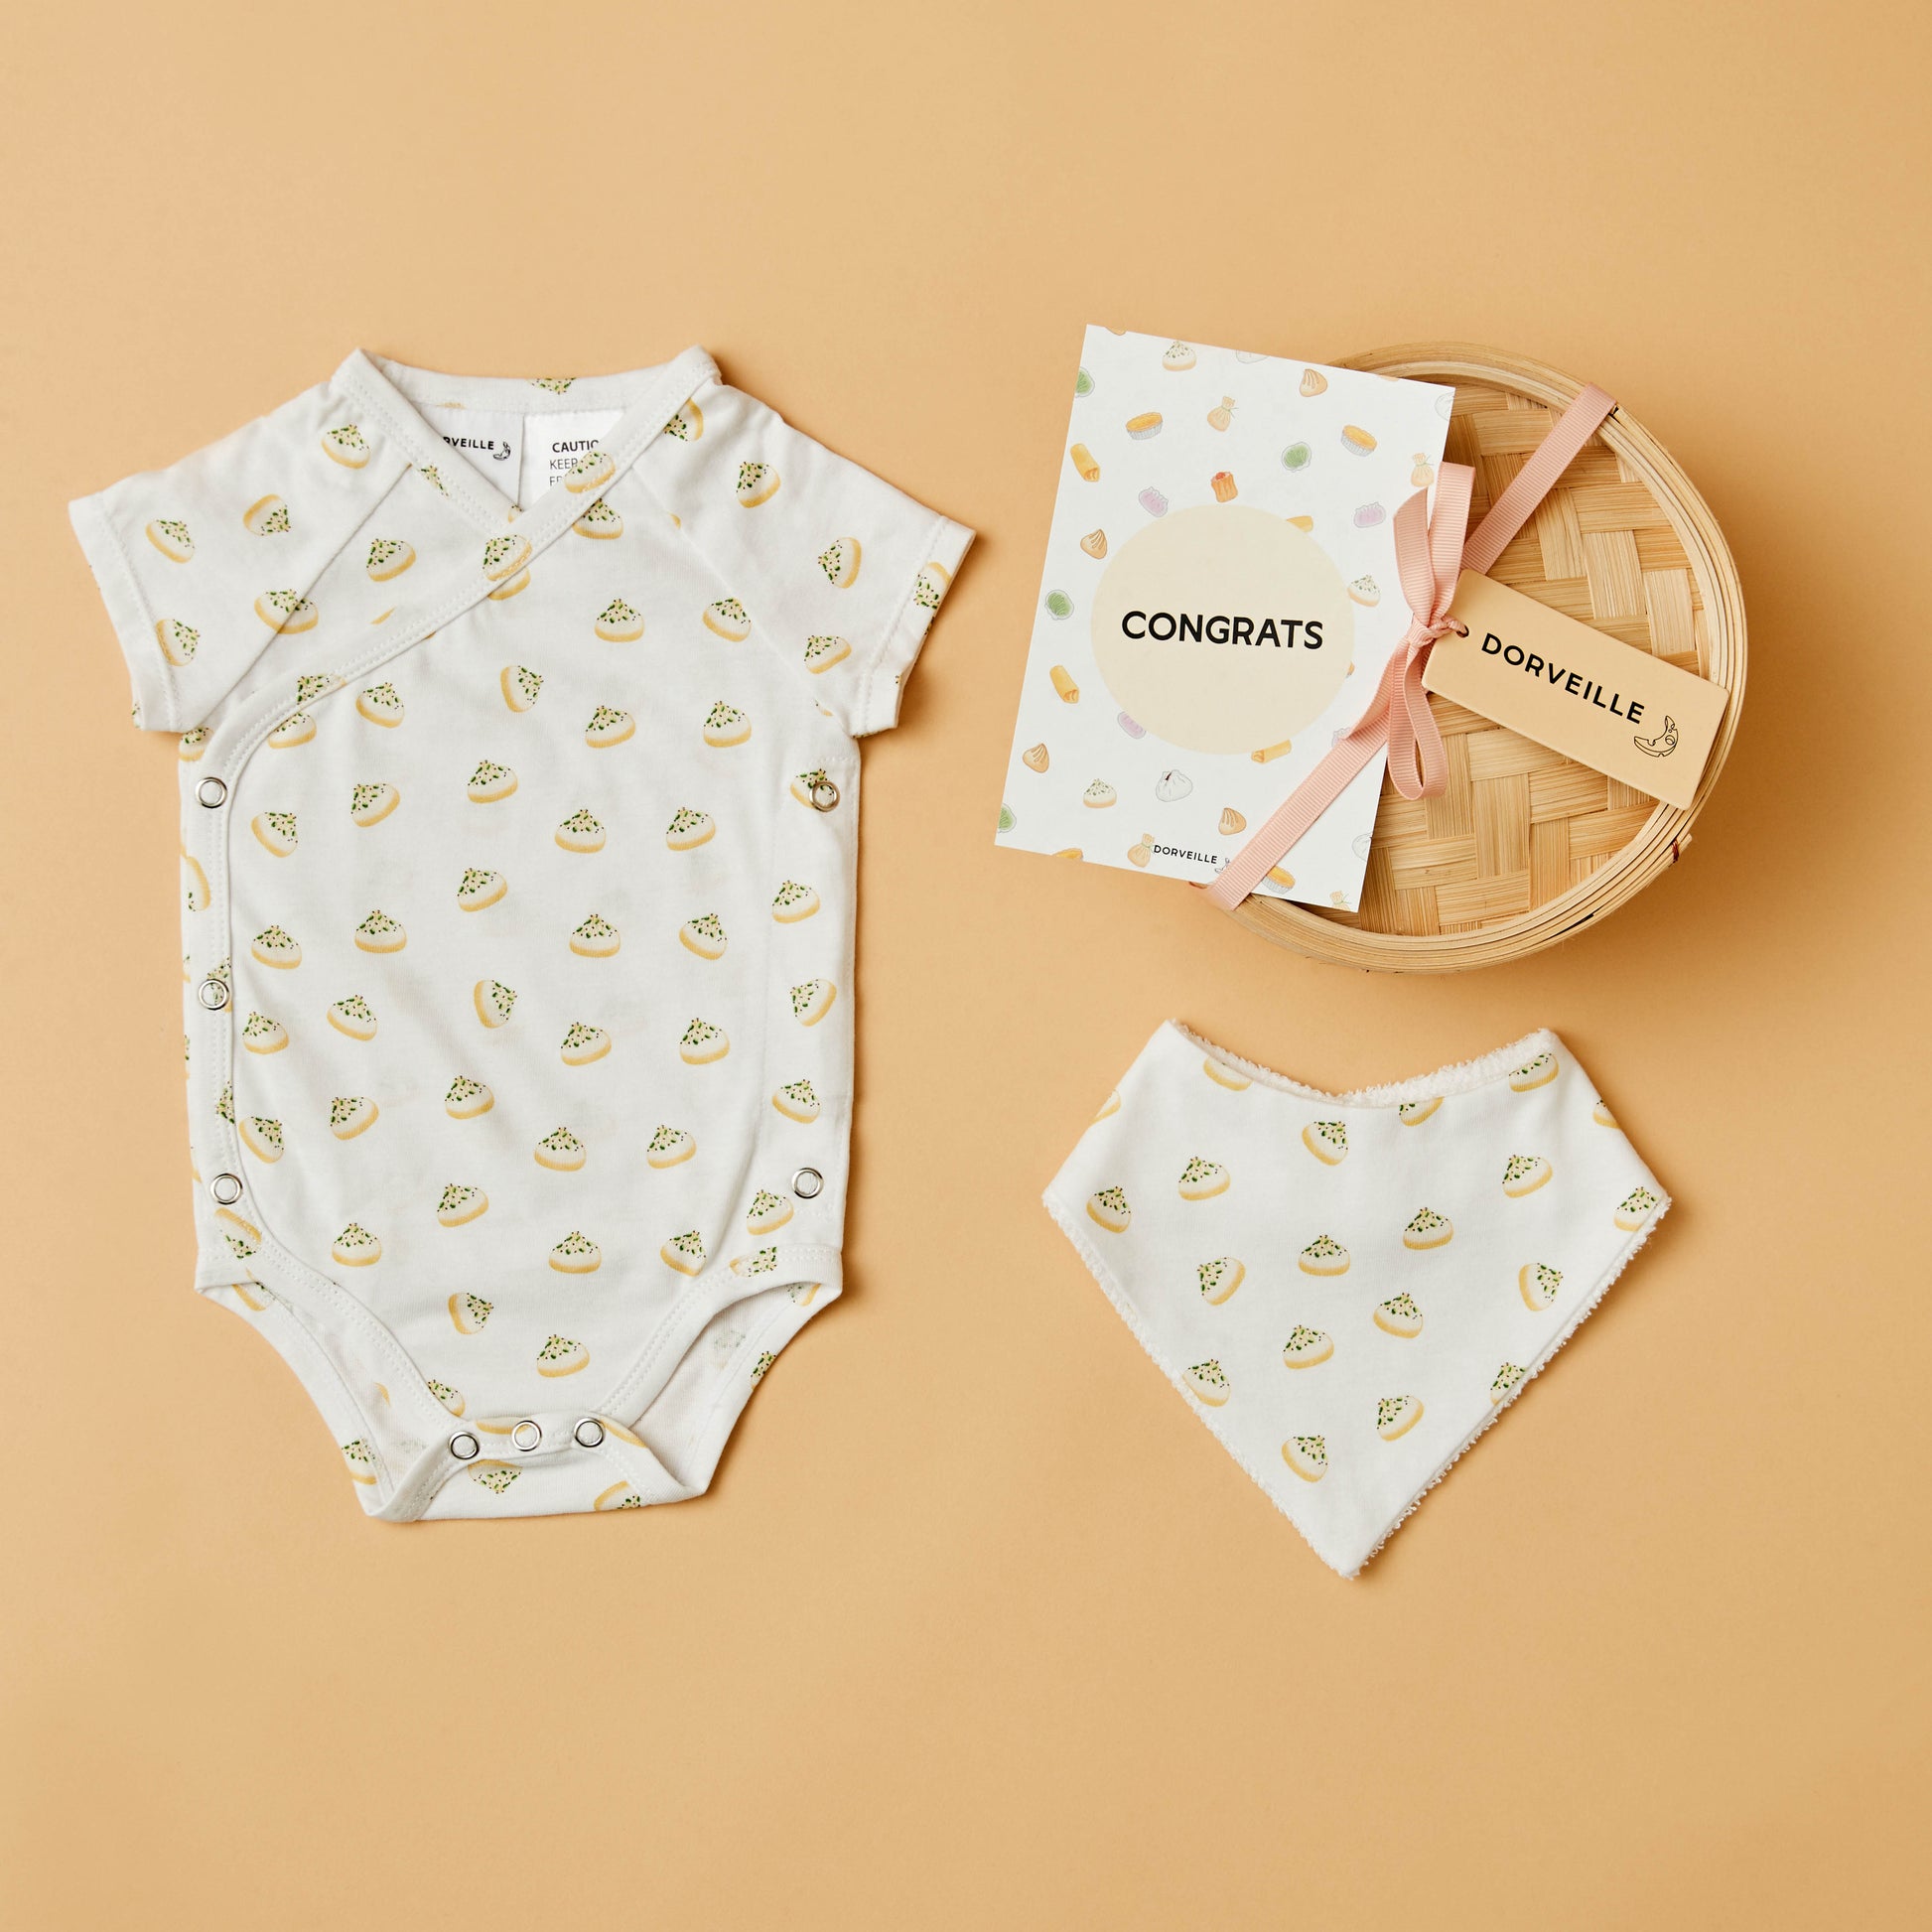 Dumpling inspired baby bodysuit, matching bib, Congrats postcard and a Bamboo Steamer Basket with pink ribbon